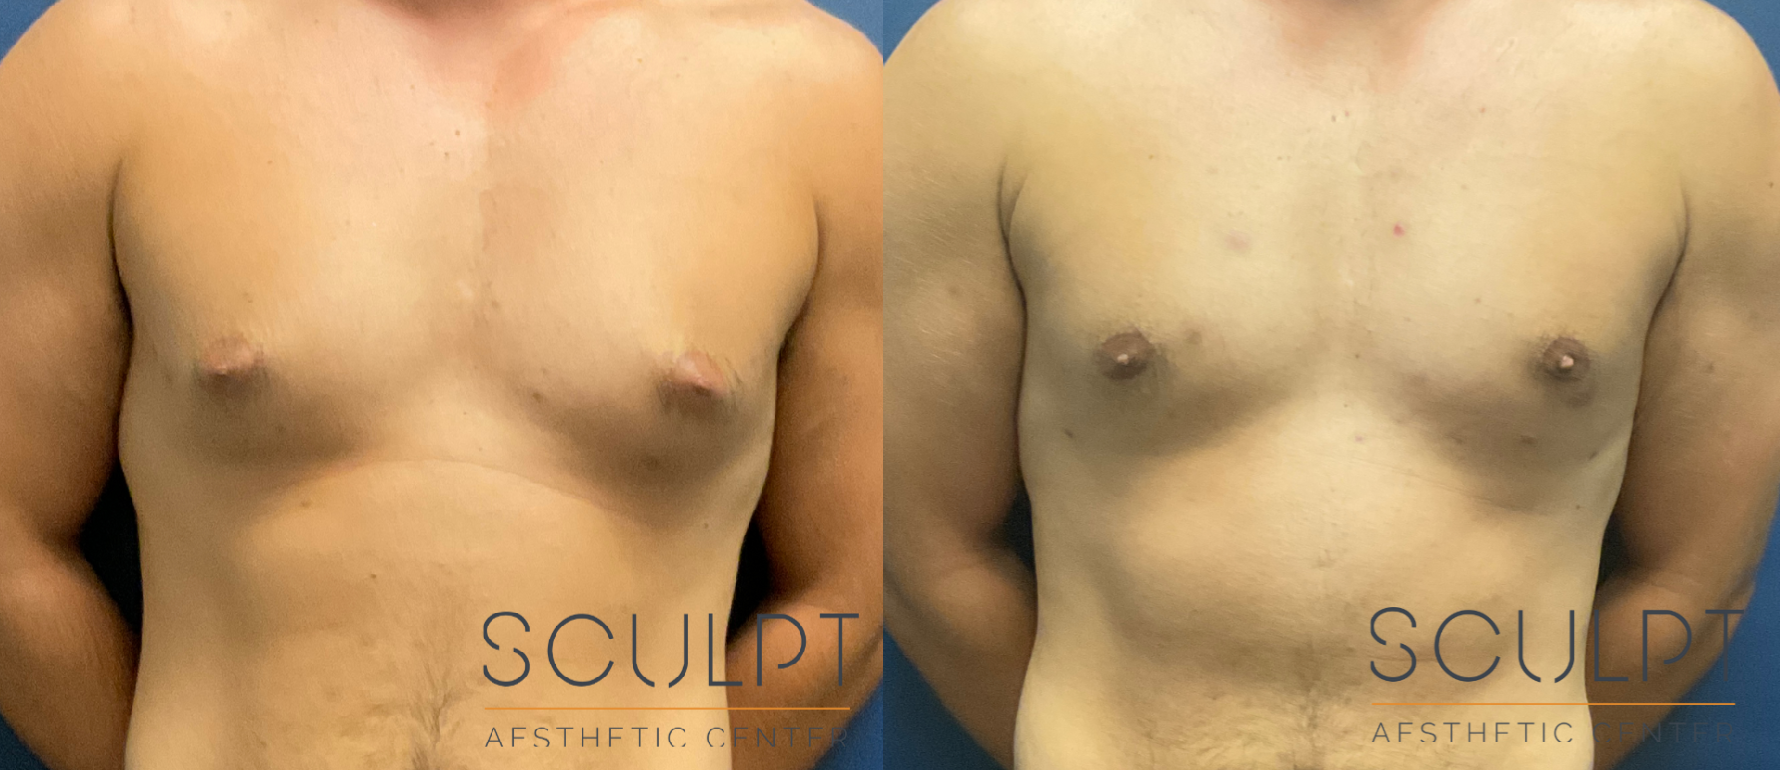 Gynecomastia Before & After Sculpcenter